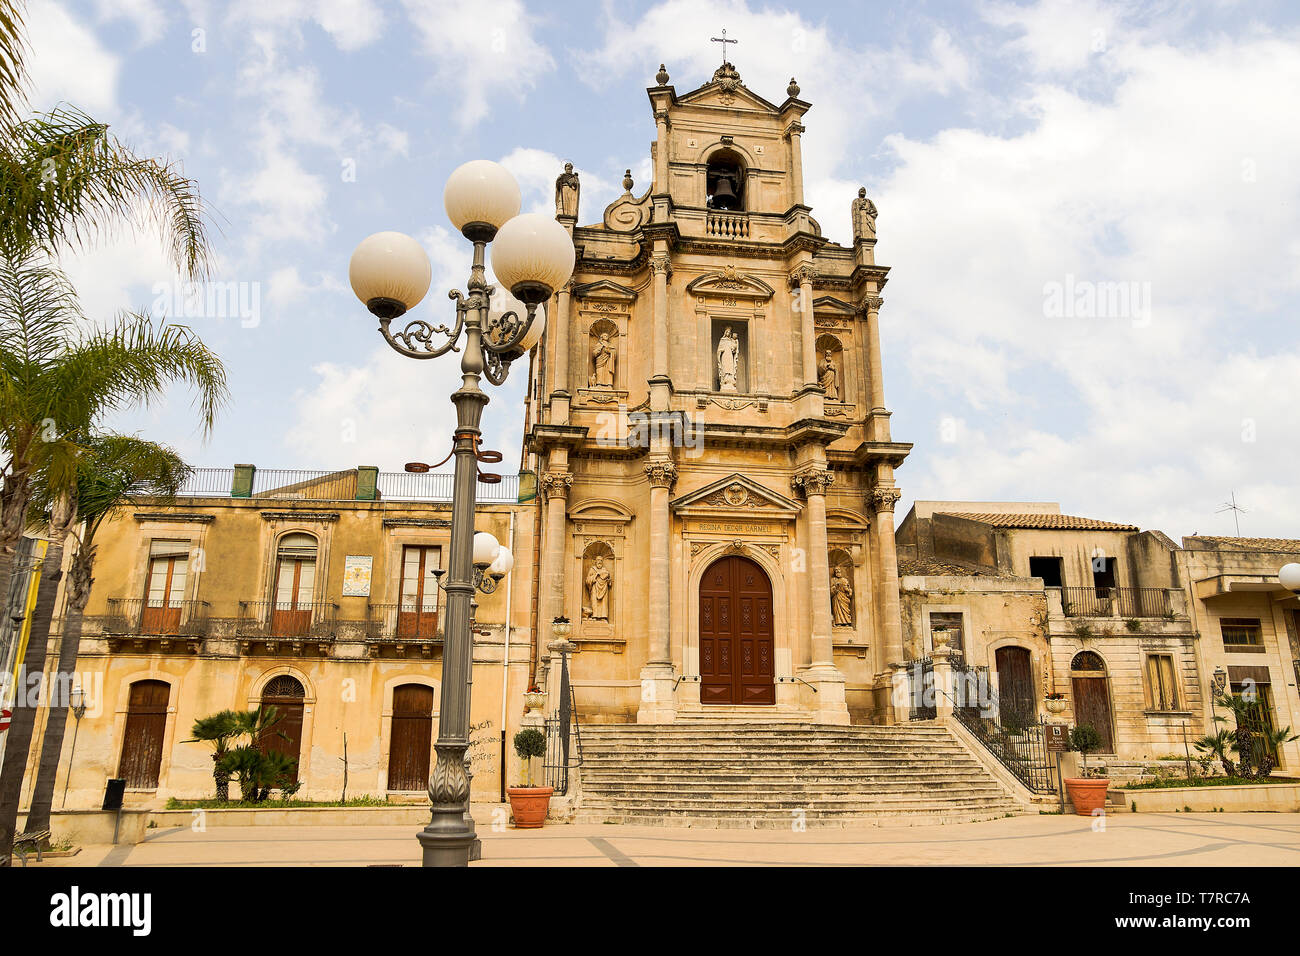 Exterior Views of Chiesa del Carmine in Floridía, Province of Syracuse, Italy. Stock Photo